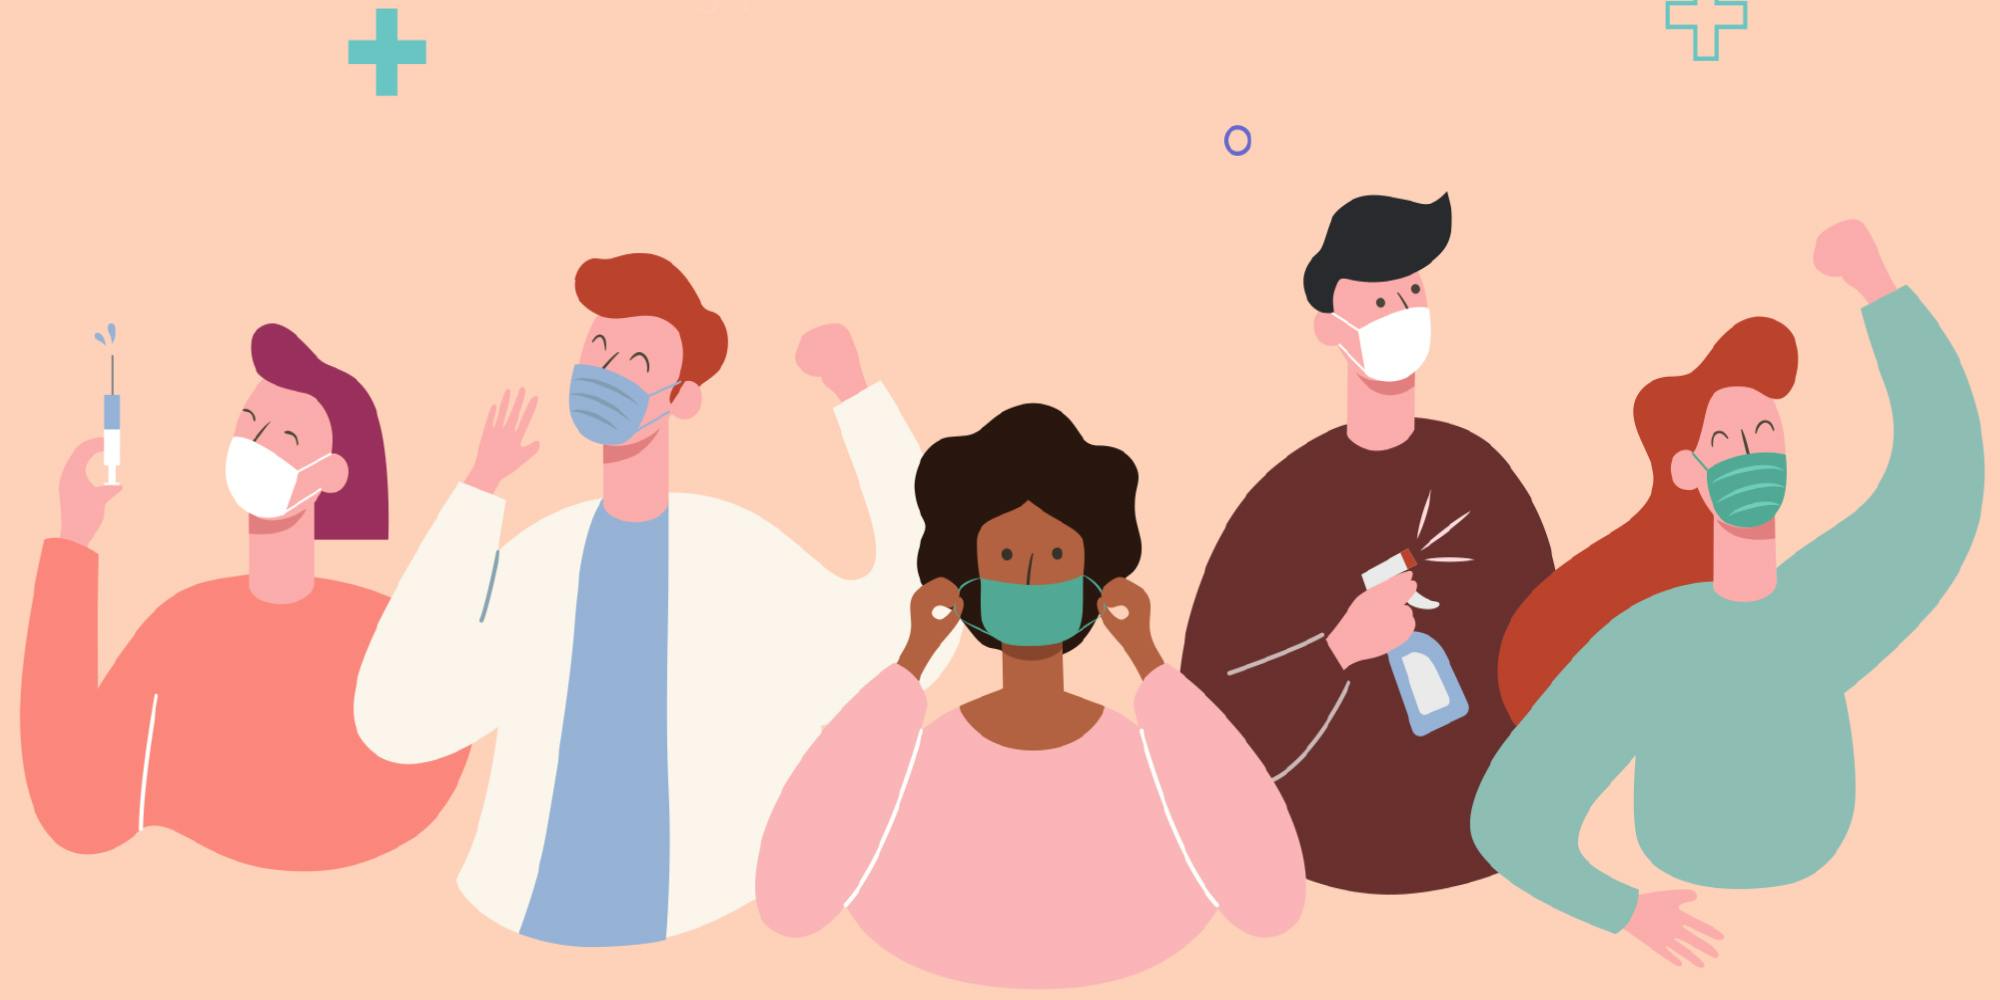 Illustration of people wearing masks, spraying disinfectant, and a doctor holding a vaccine for COVID-19.